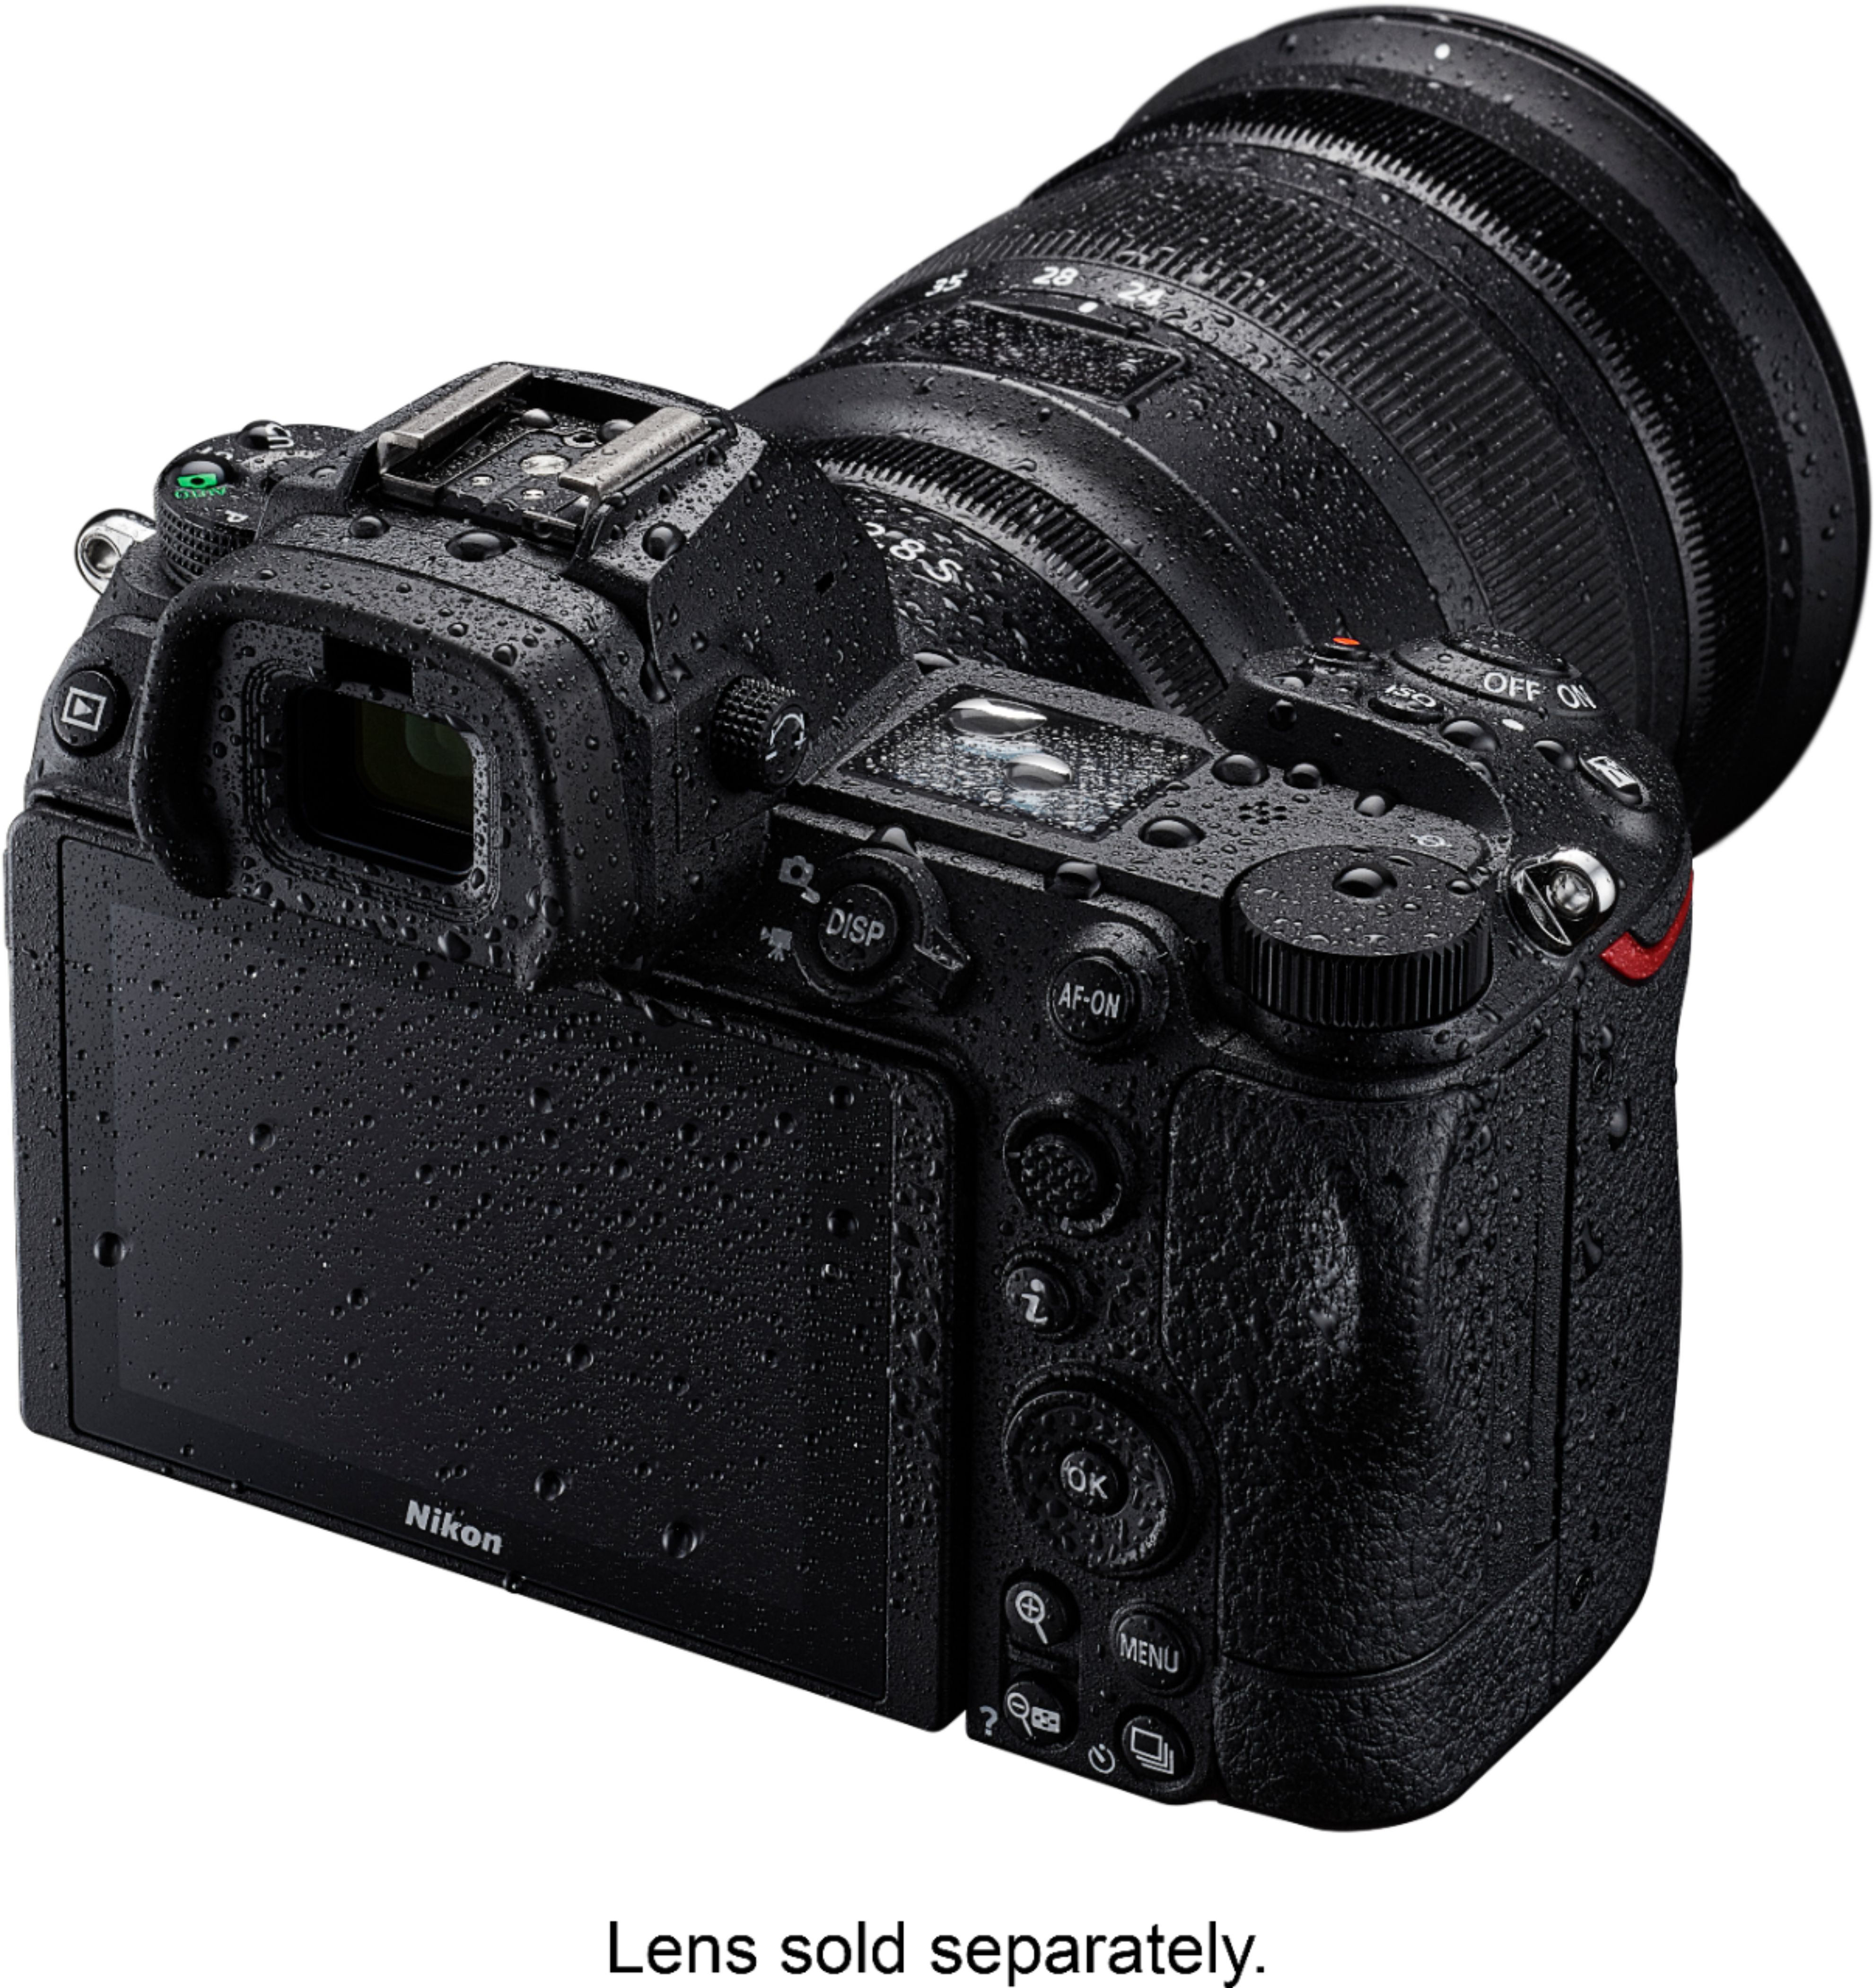 Angle View: Nikon Z6II Mirrorless Camera 24.5MP Full Frame FX-Format Body Only 1659